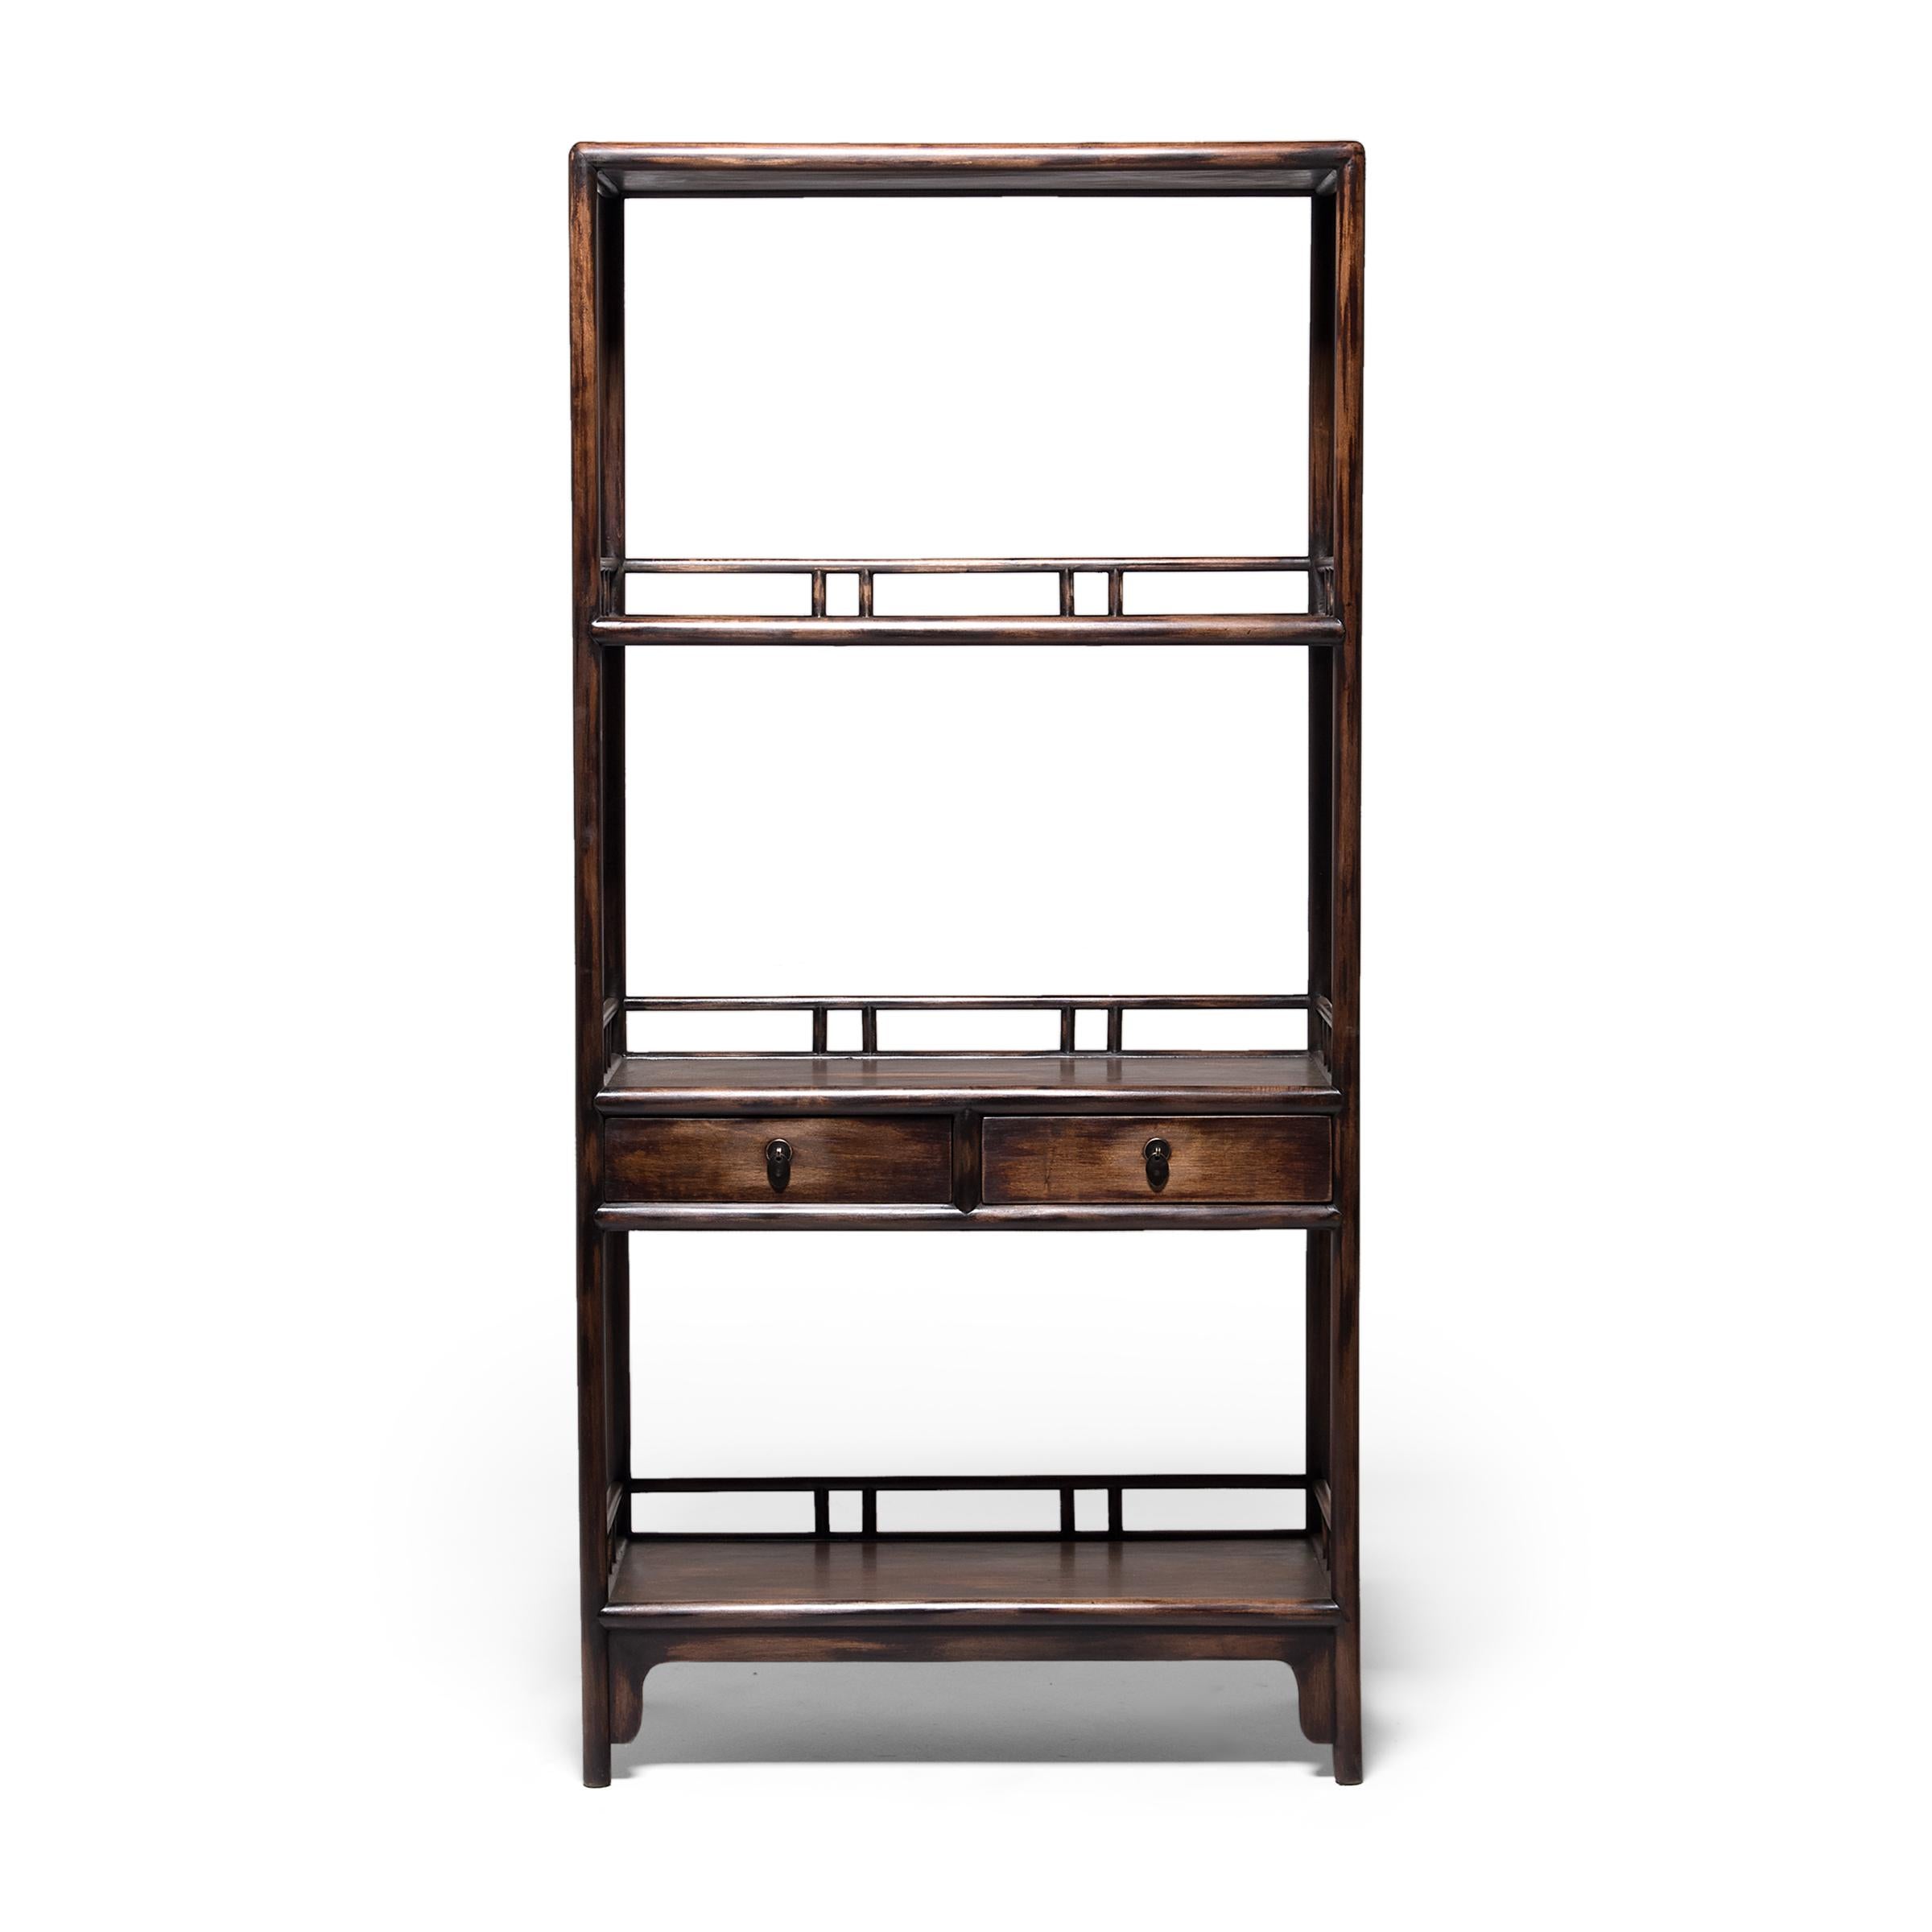 Dated to the early 20th century, this pair of two-drawer collector's shelves is seamlessly constructed with clean lines and open sides. Rounded edges soften the angular frame and reference the bent bamboo furniture of earlier dynasties. Once the